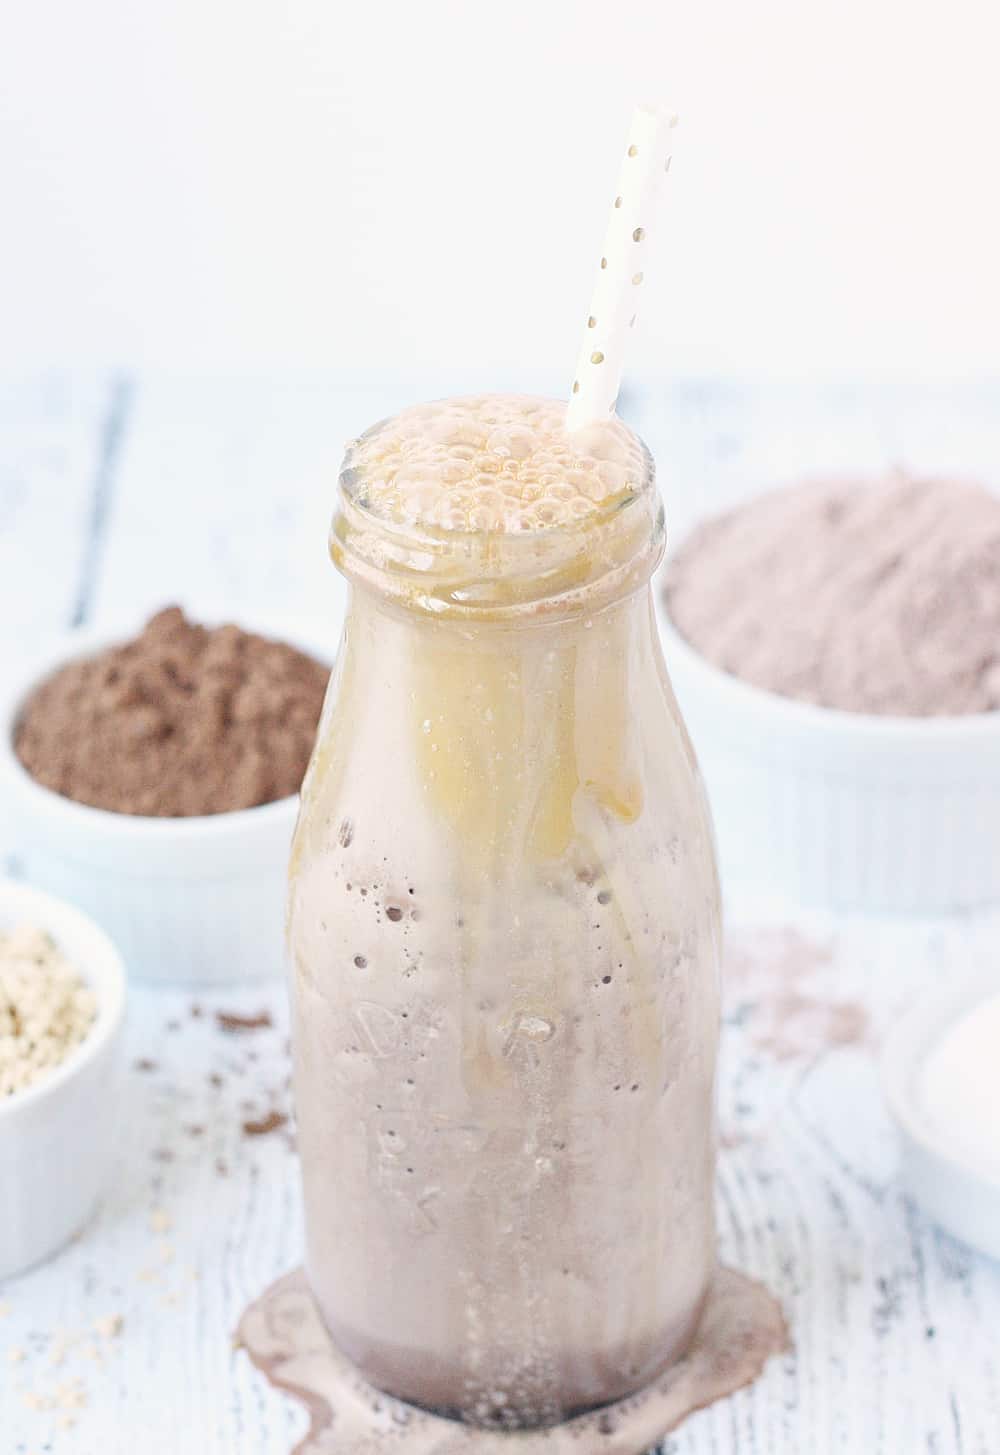 Healthy Chocolate Caramel Peanut Butter Smoothie -- This healthy chocolate caramel peanut butter smoothie tastes like dessert! Change up that ol' chocolate protein shake by adding sugar-free caramel syrup, peanut butter powder, and a pinch of kosher sea salt. | halfscratched.com #smoothie #chocolate #peanutbutter #proteinshake